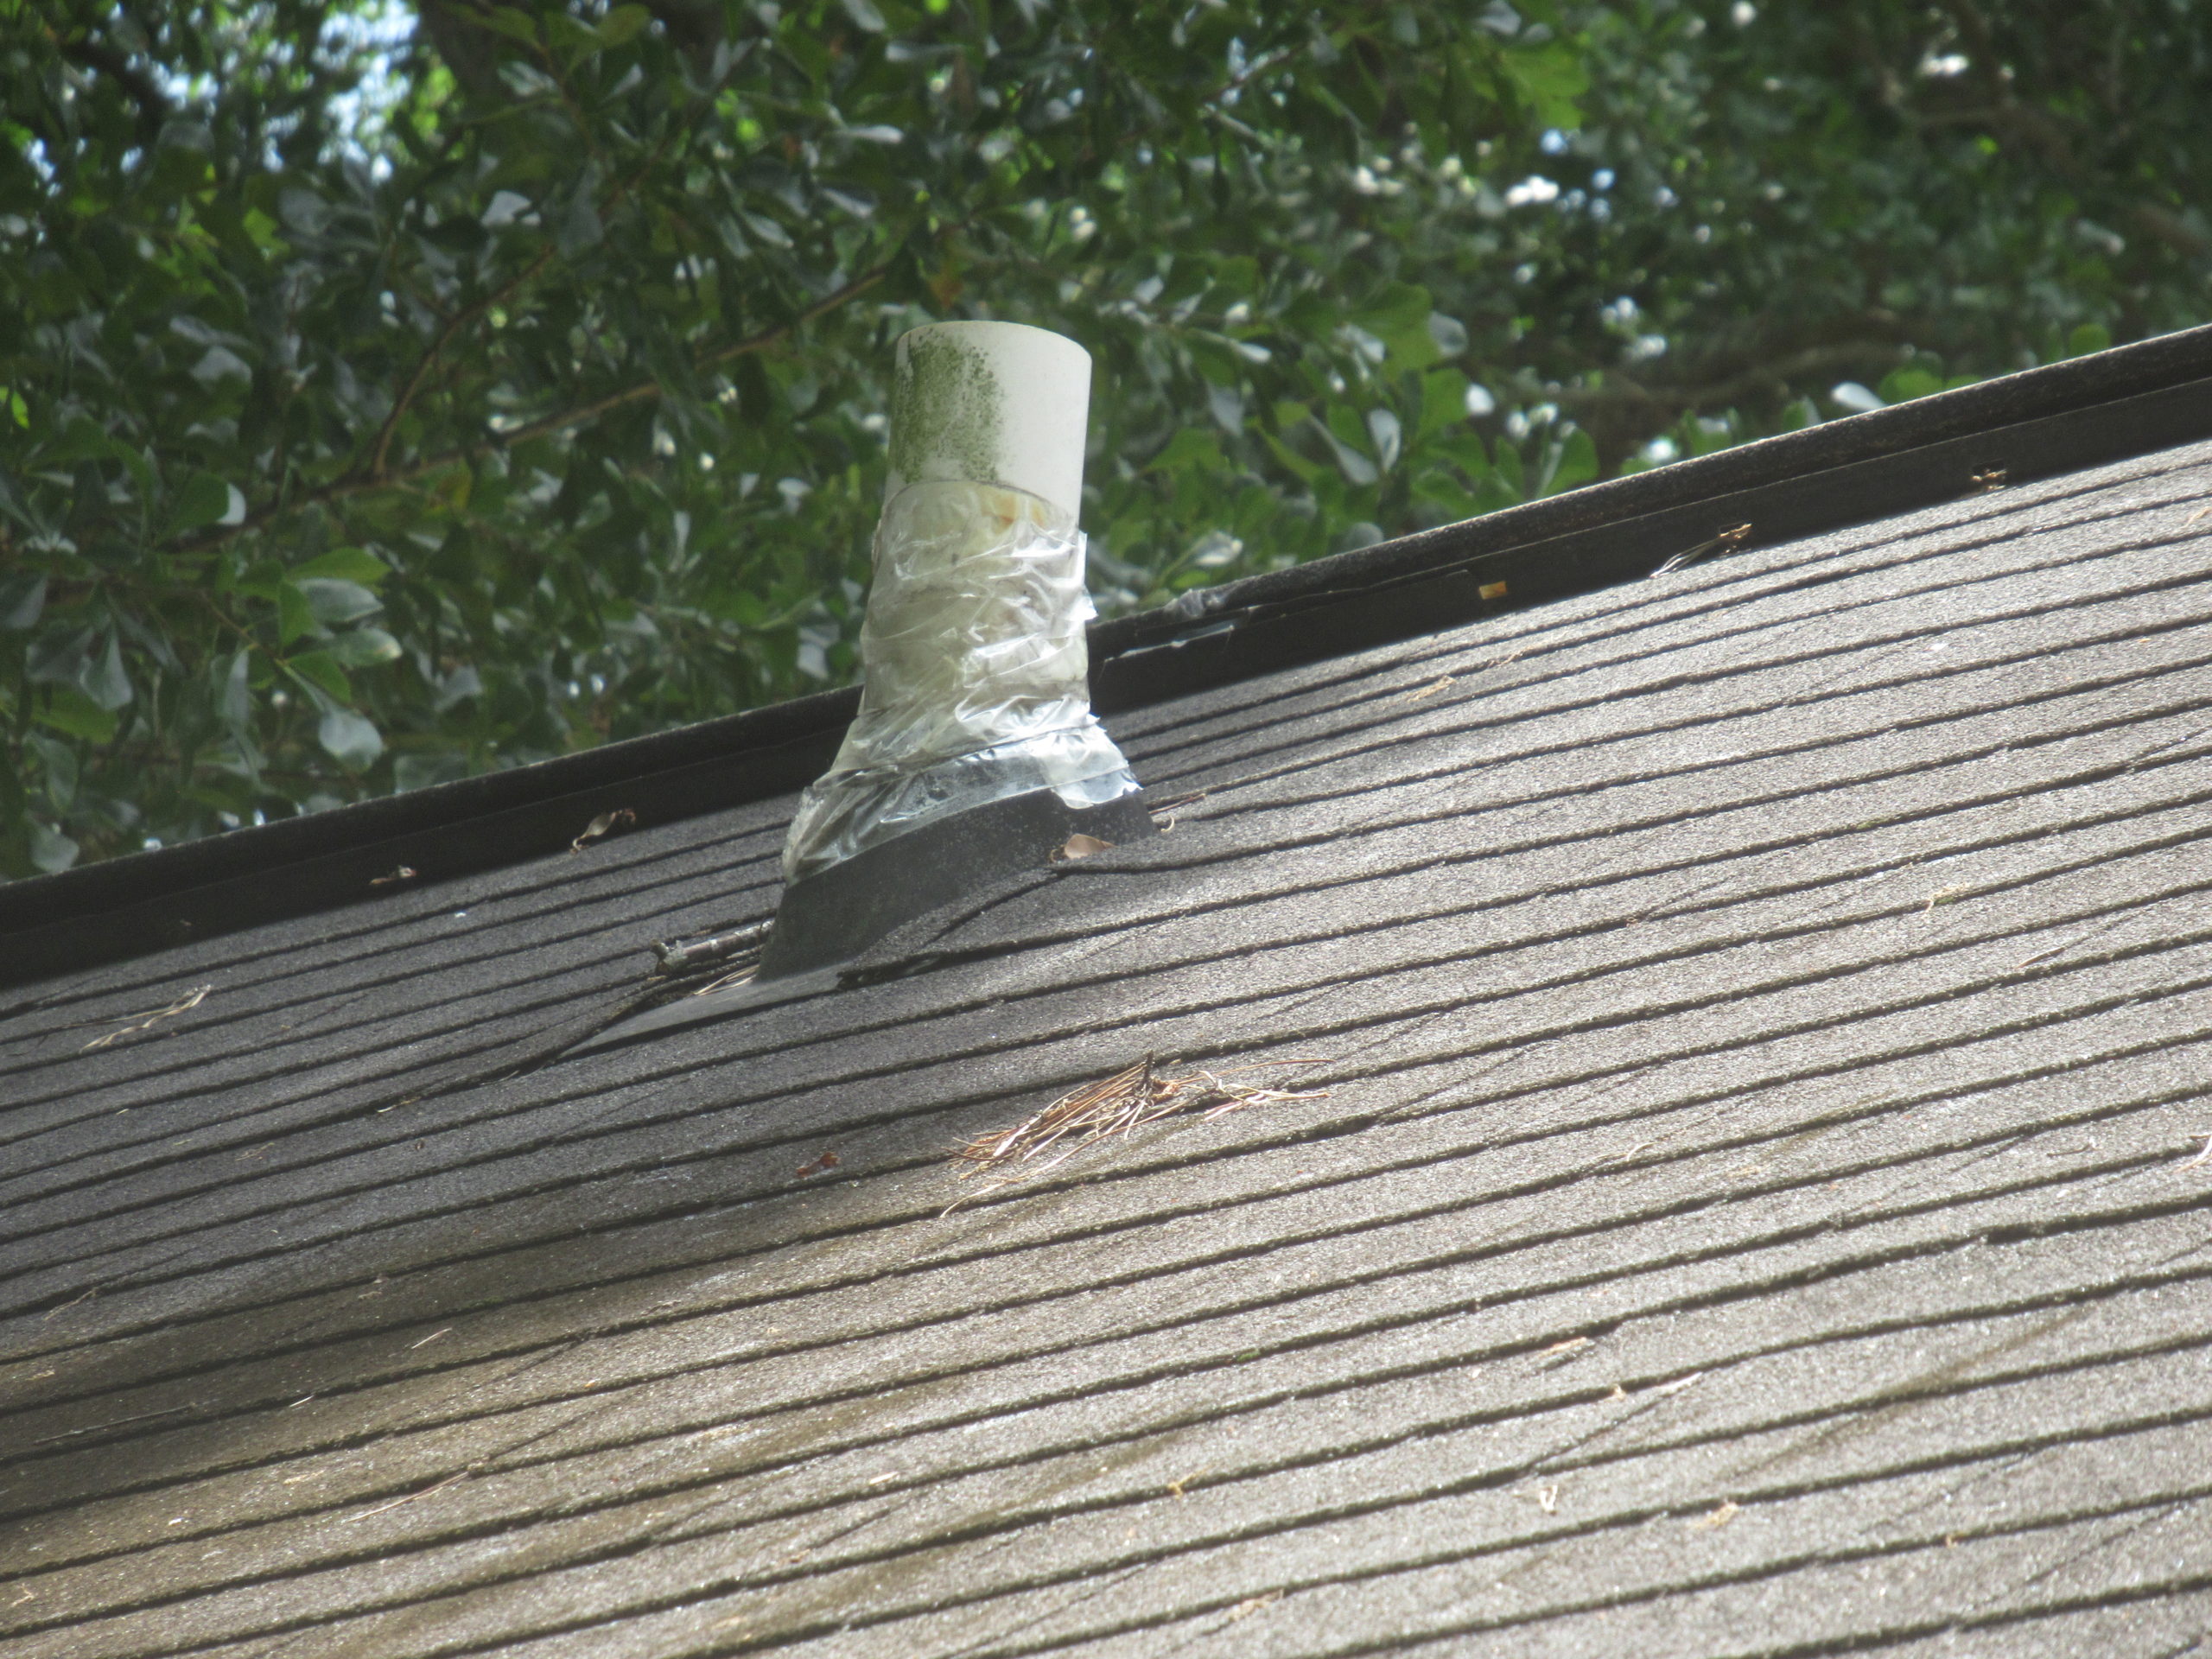 Plumbing vent wrapped in tape